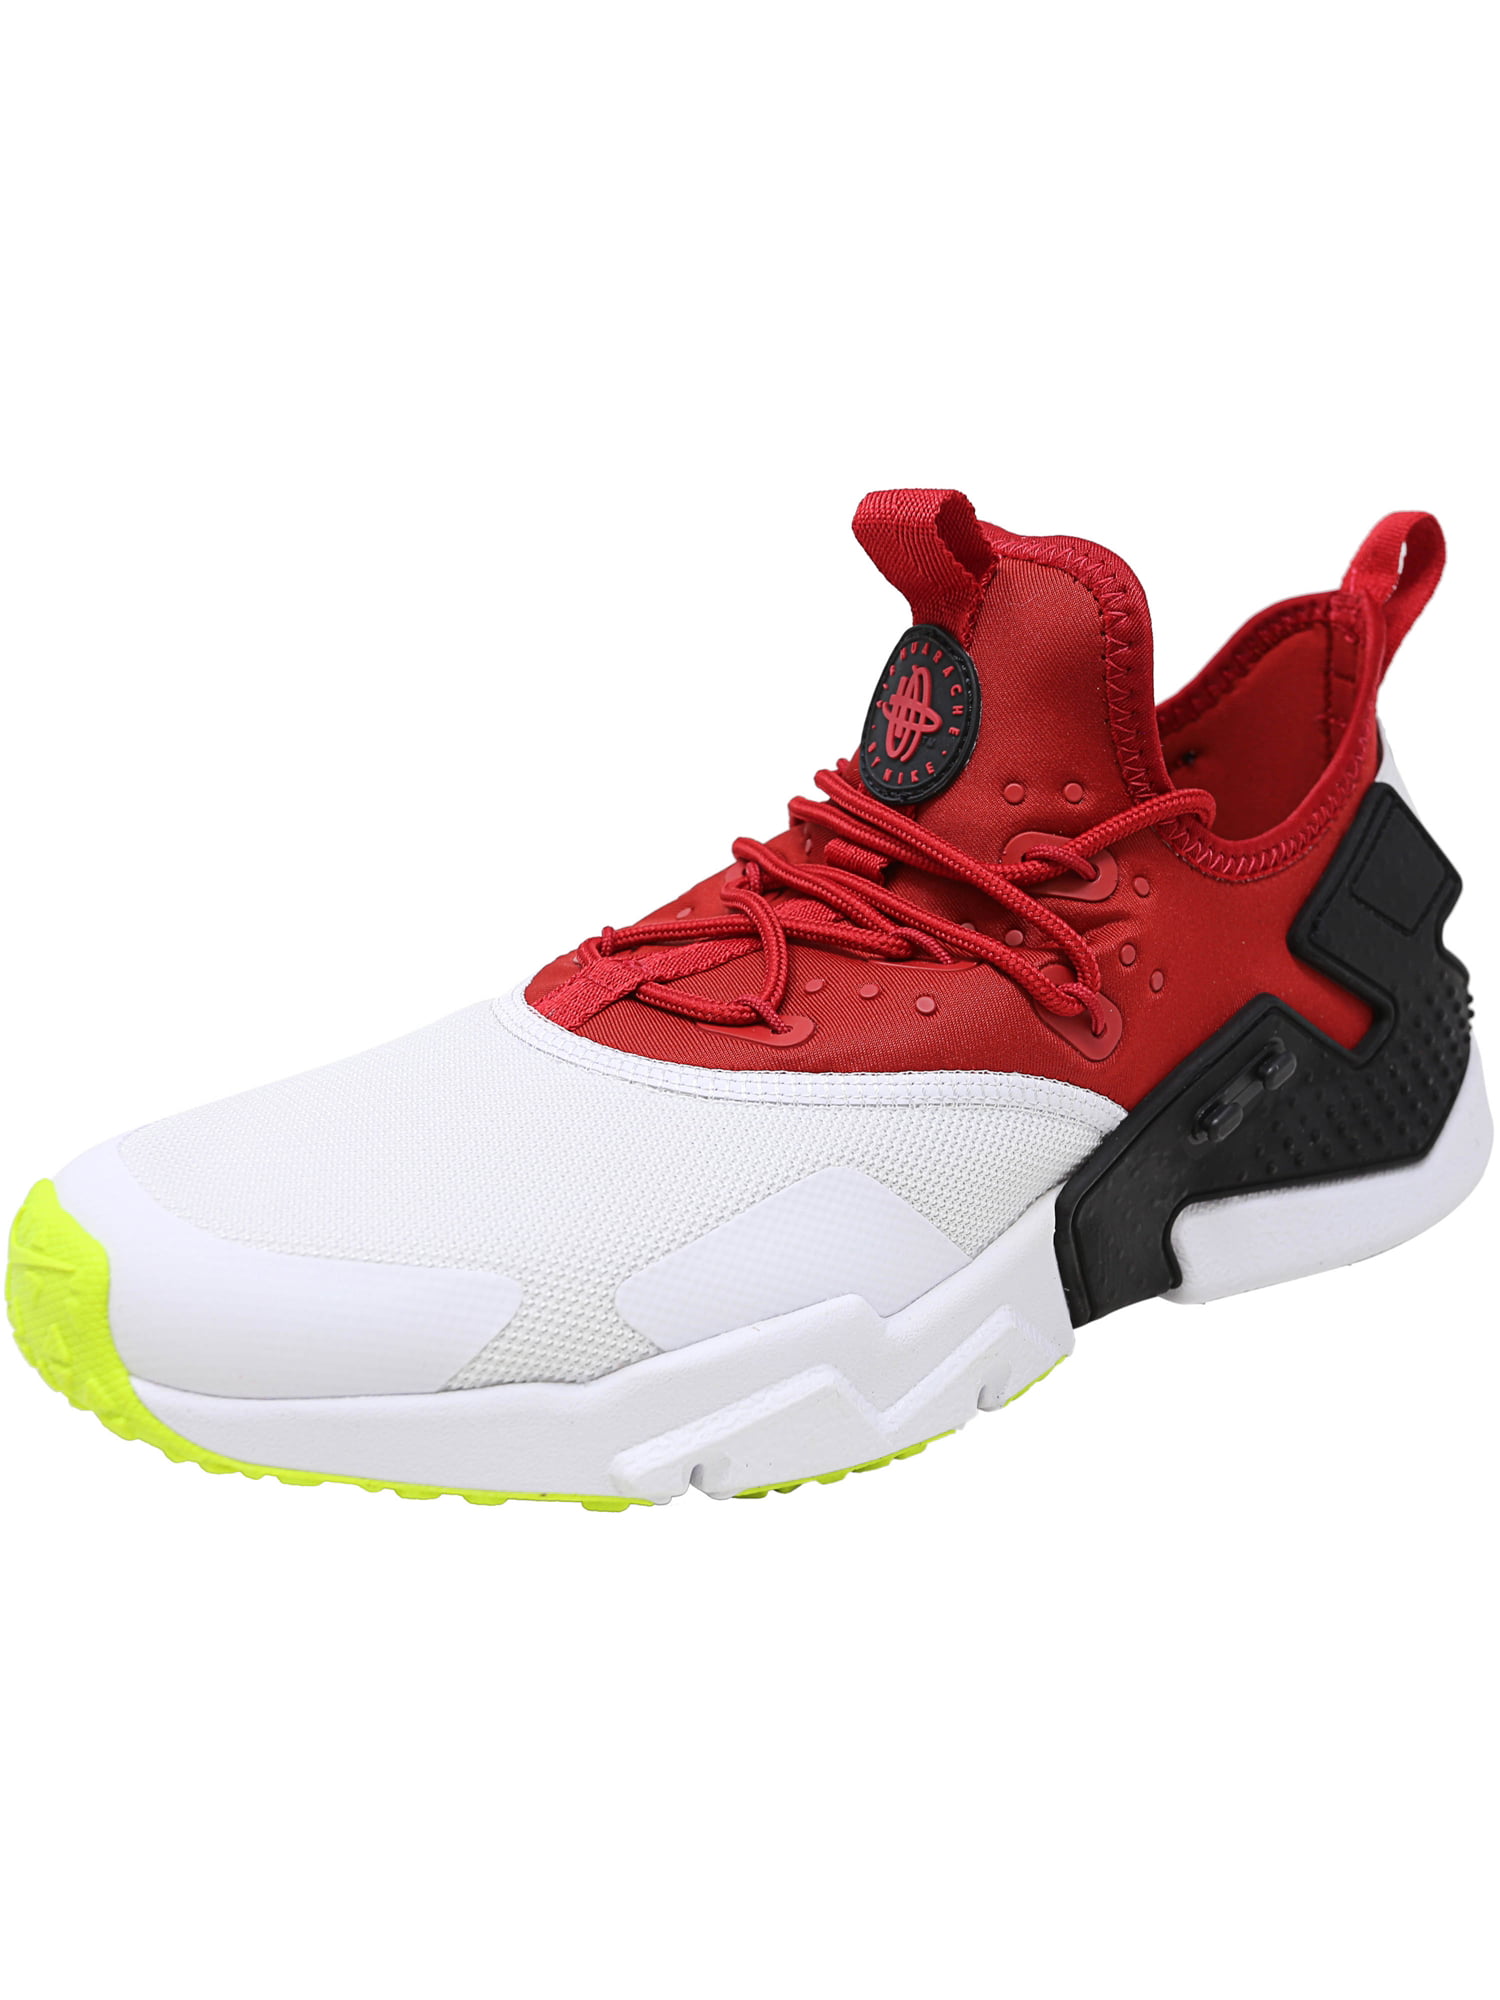 red huaraches mens outfit